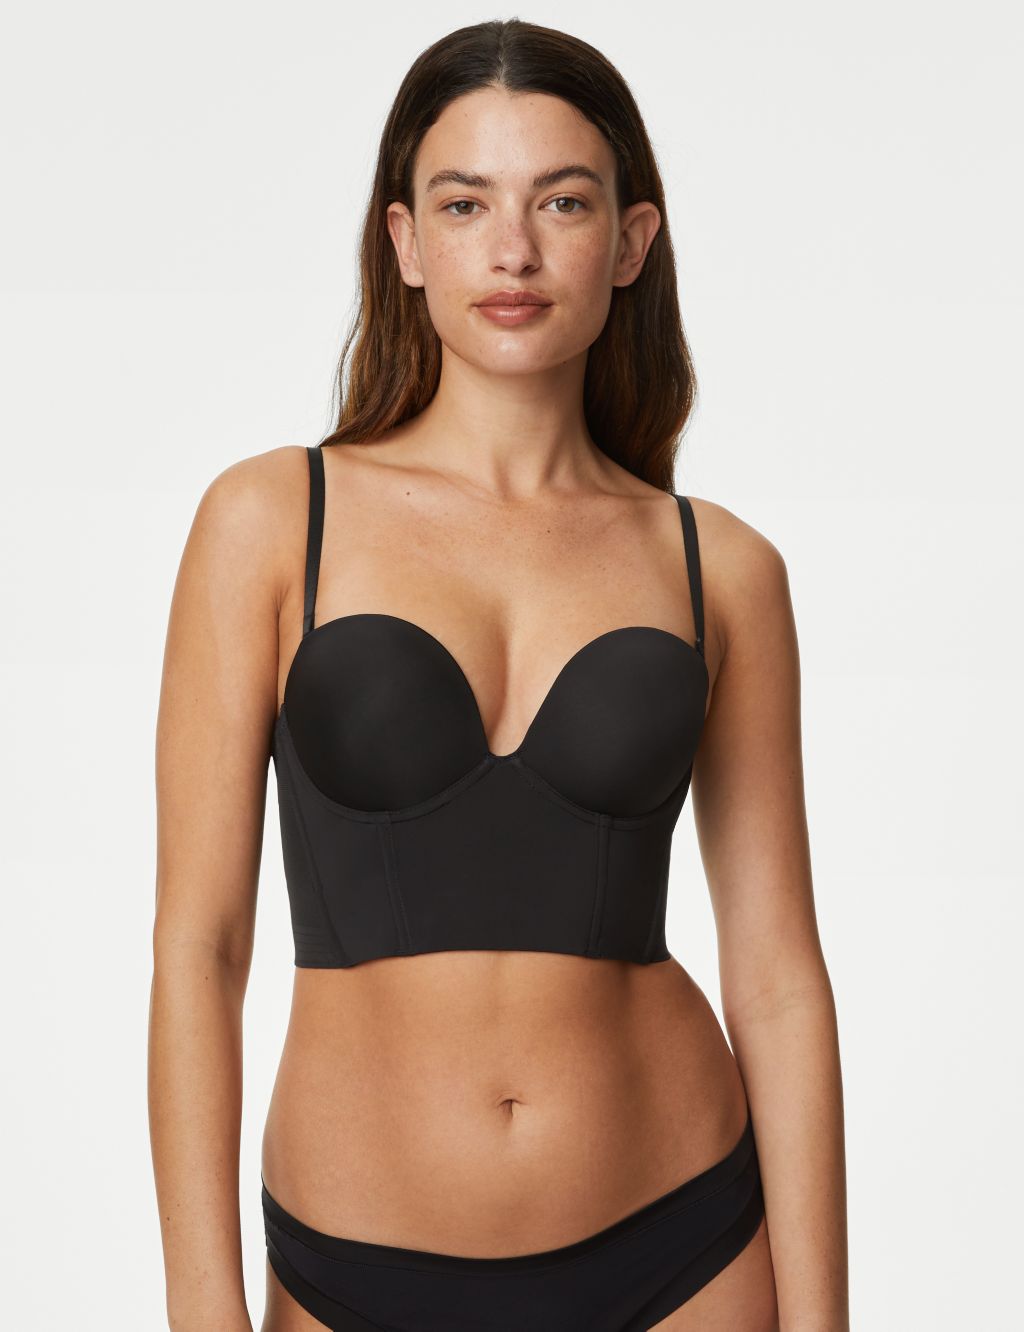 MARKS & SPENCERS SMOOTH LINES LIGHTWEIGHT CUPS MULTIWAY STRAPS BRA